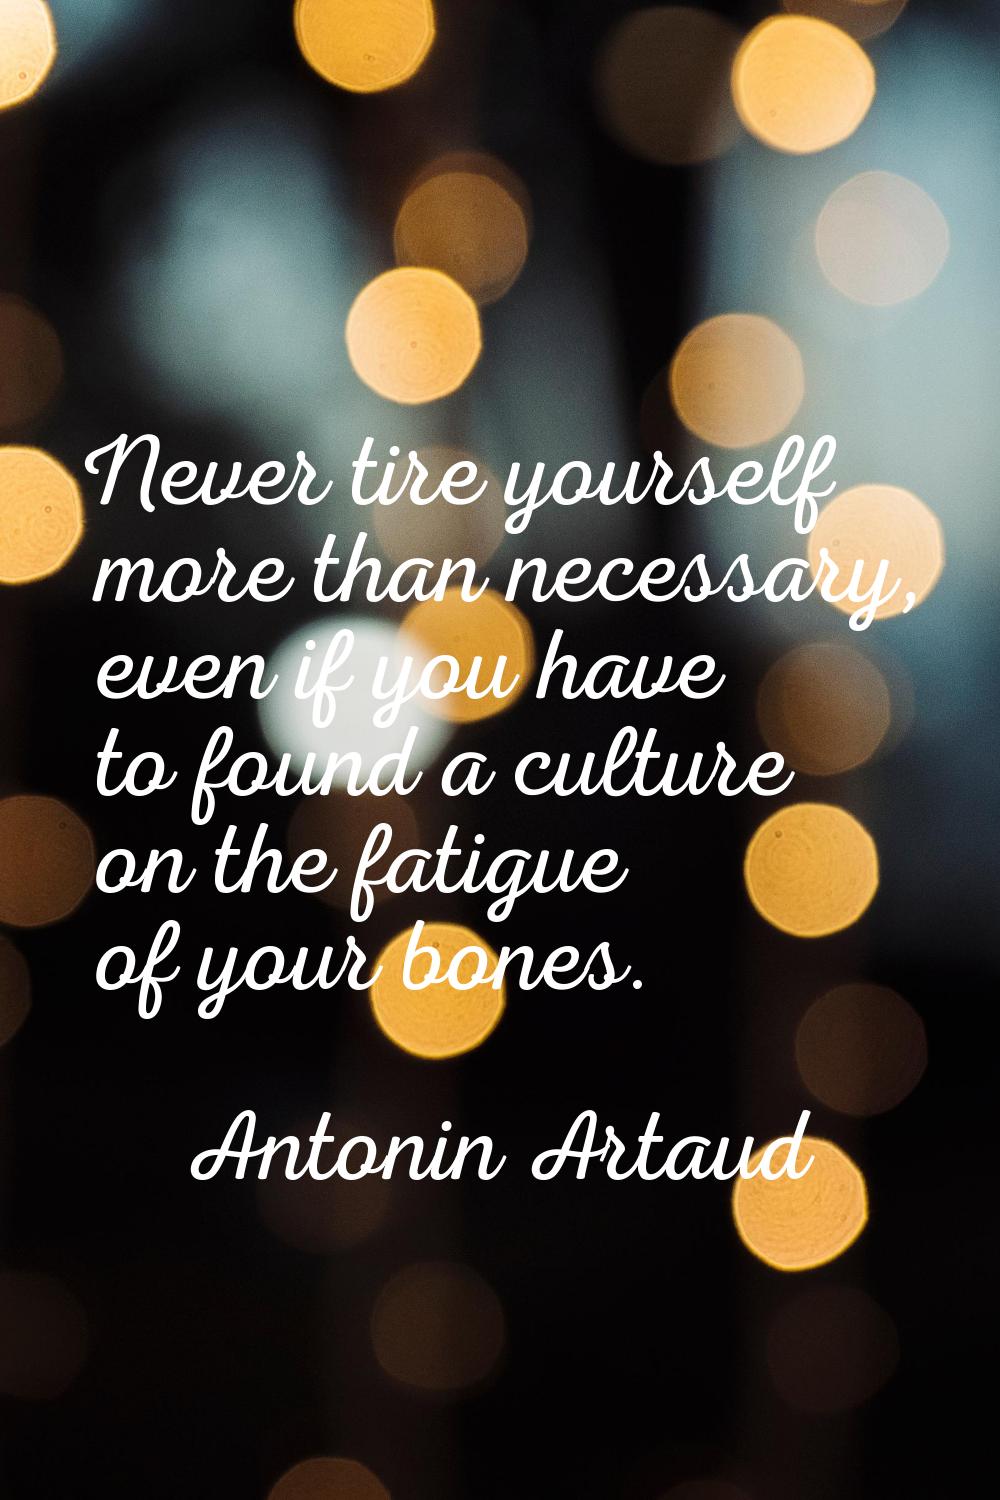 Never tire yourself more than necessary, even if you have to found a culture on the fatigue of your